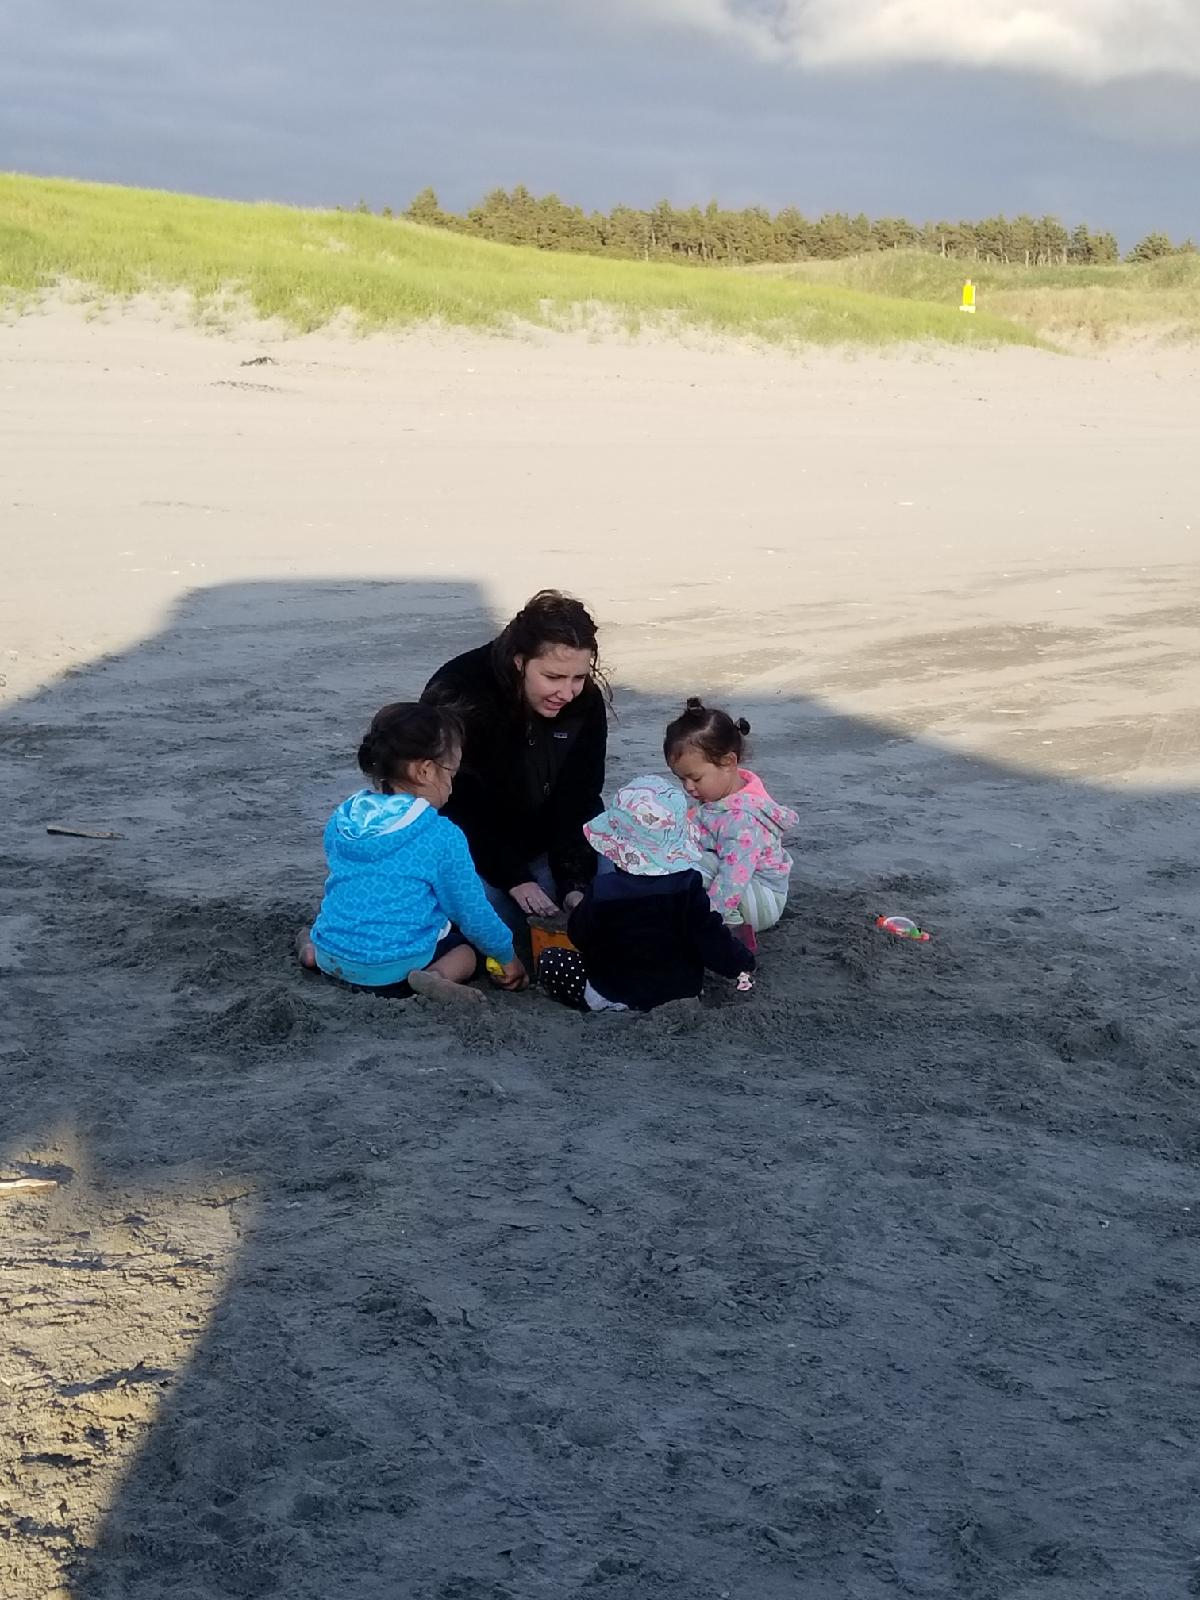 Playing in the sand on the beach in Oregon